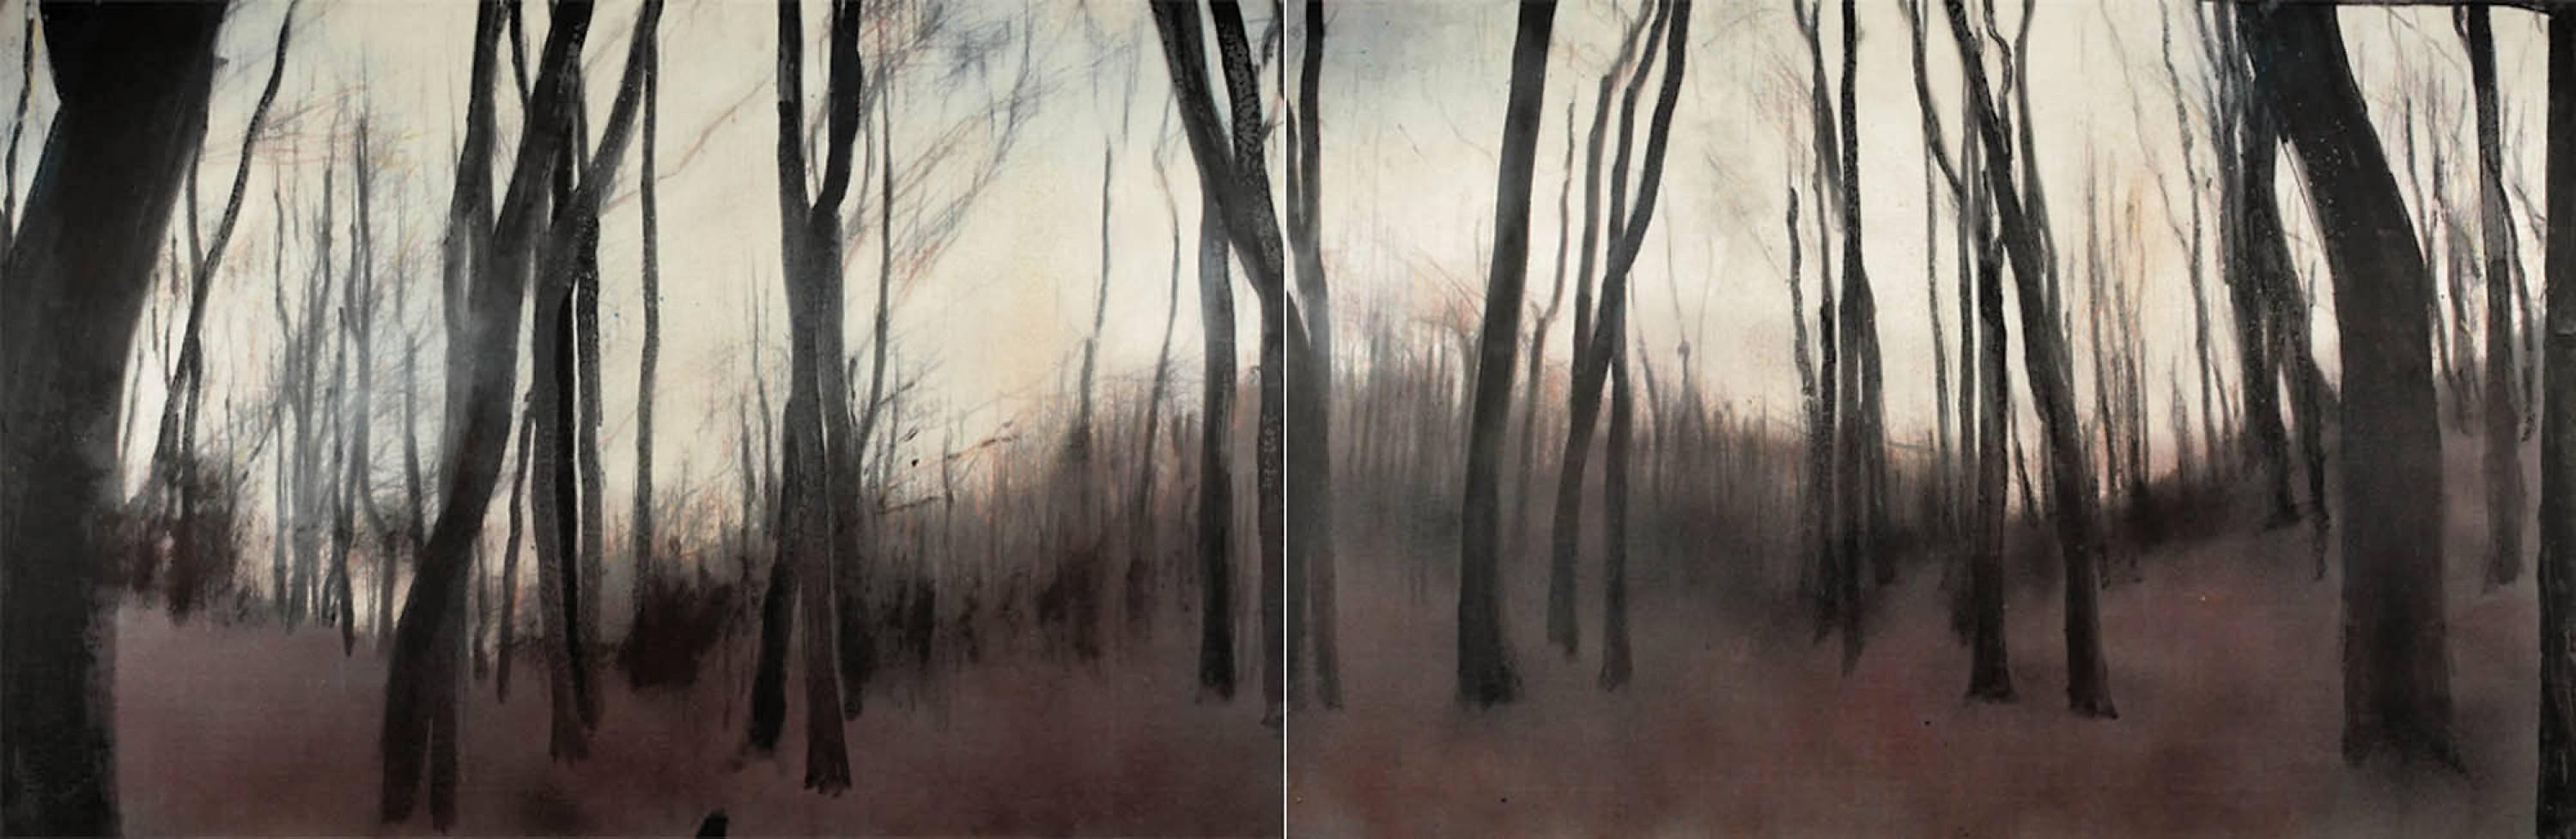 Cider forest V (diptych) - Contemporary, Landscape, Beige, Brown, Trees, Nature